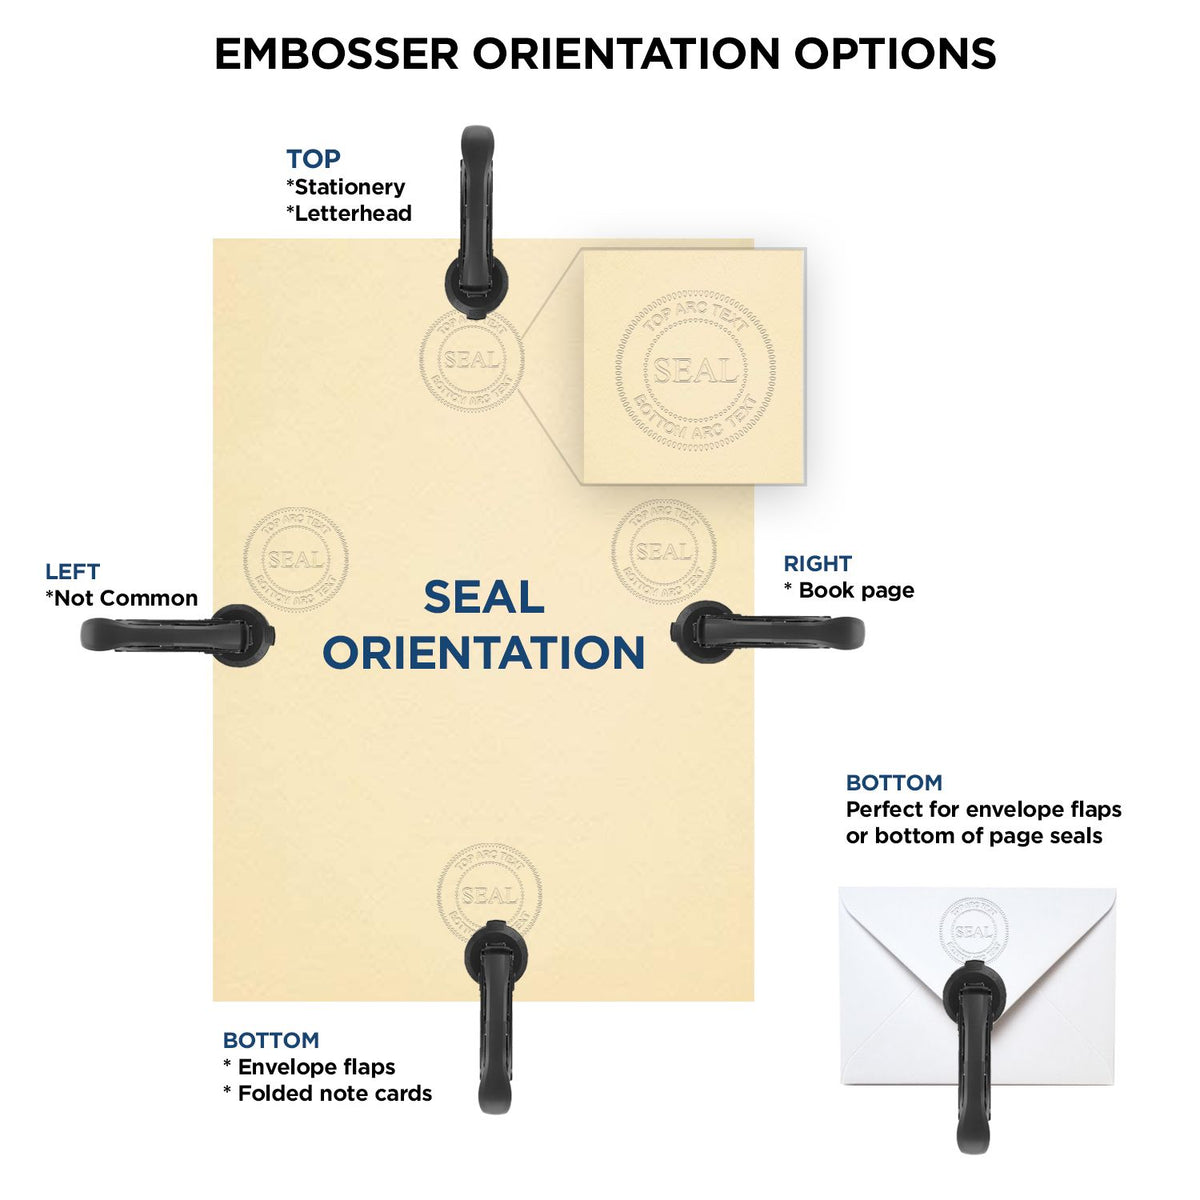 An infographic for the Soft Pocket New York Landscape Architect Embosser showing embosser orientation, this is showing examples of a top, bottom, right and left insert.